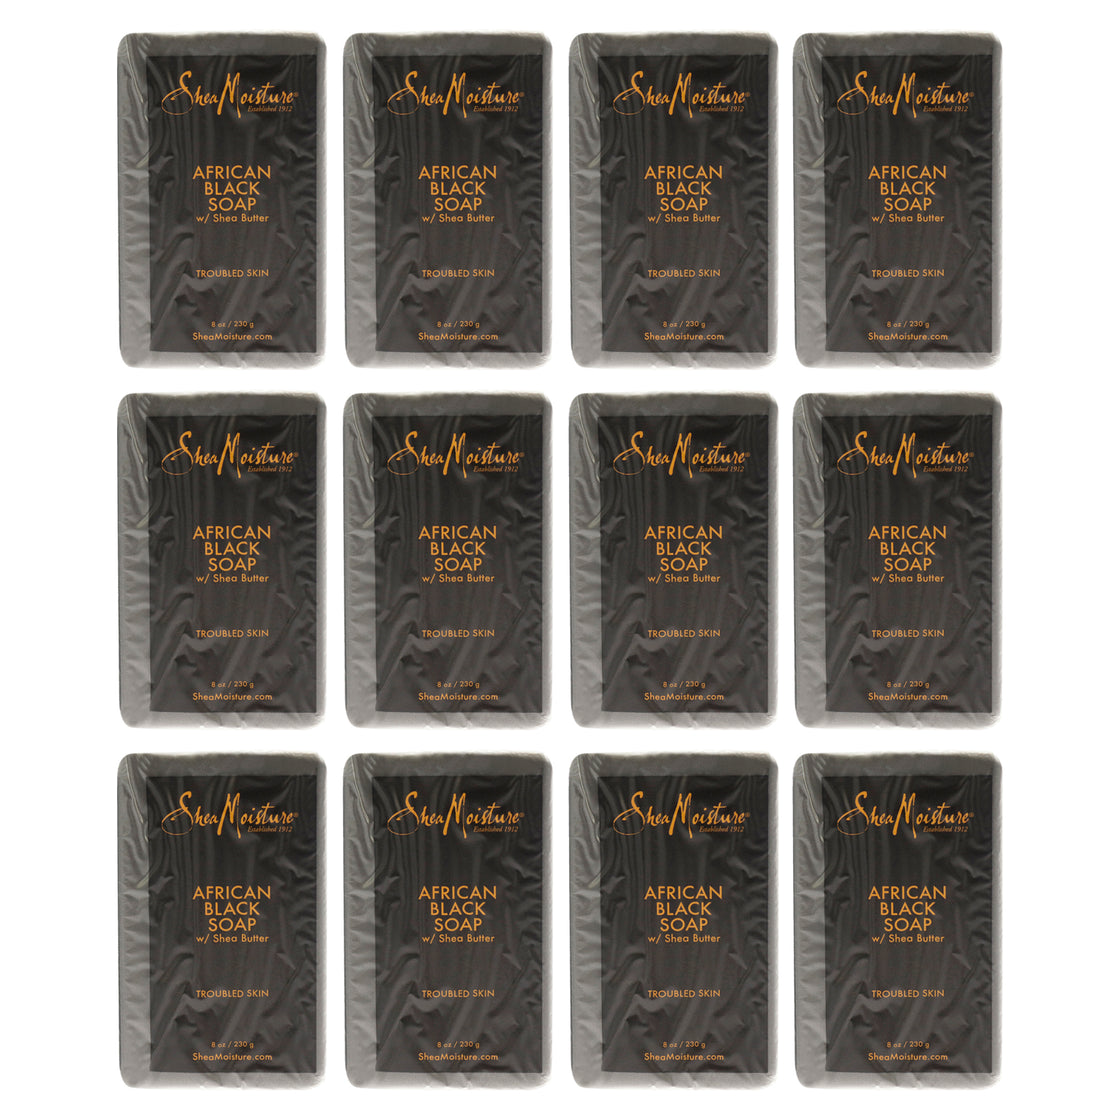 African Black Soap Troubled Skin by Shea Moisture for Unisex - 8 oz Bar Soap - Pack of 12